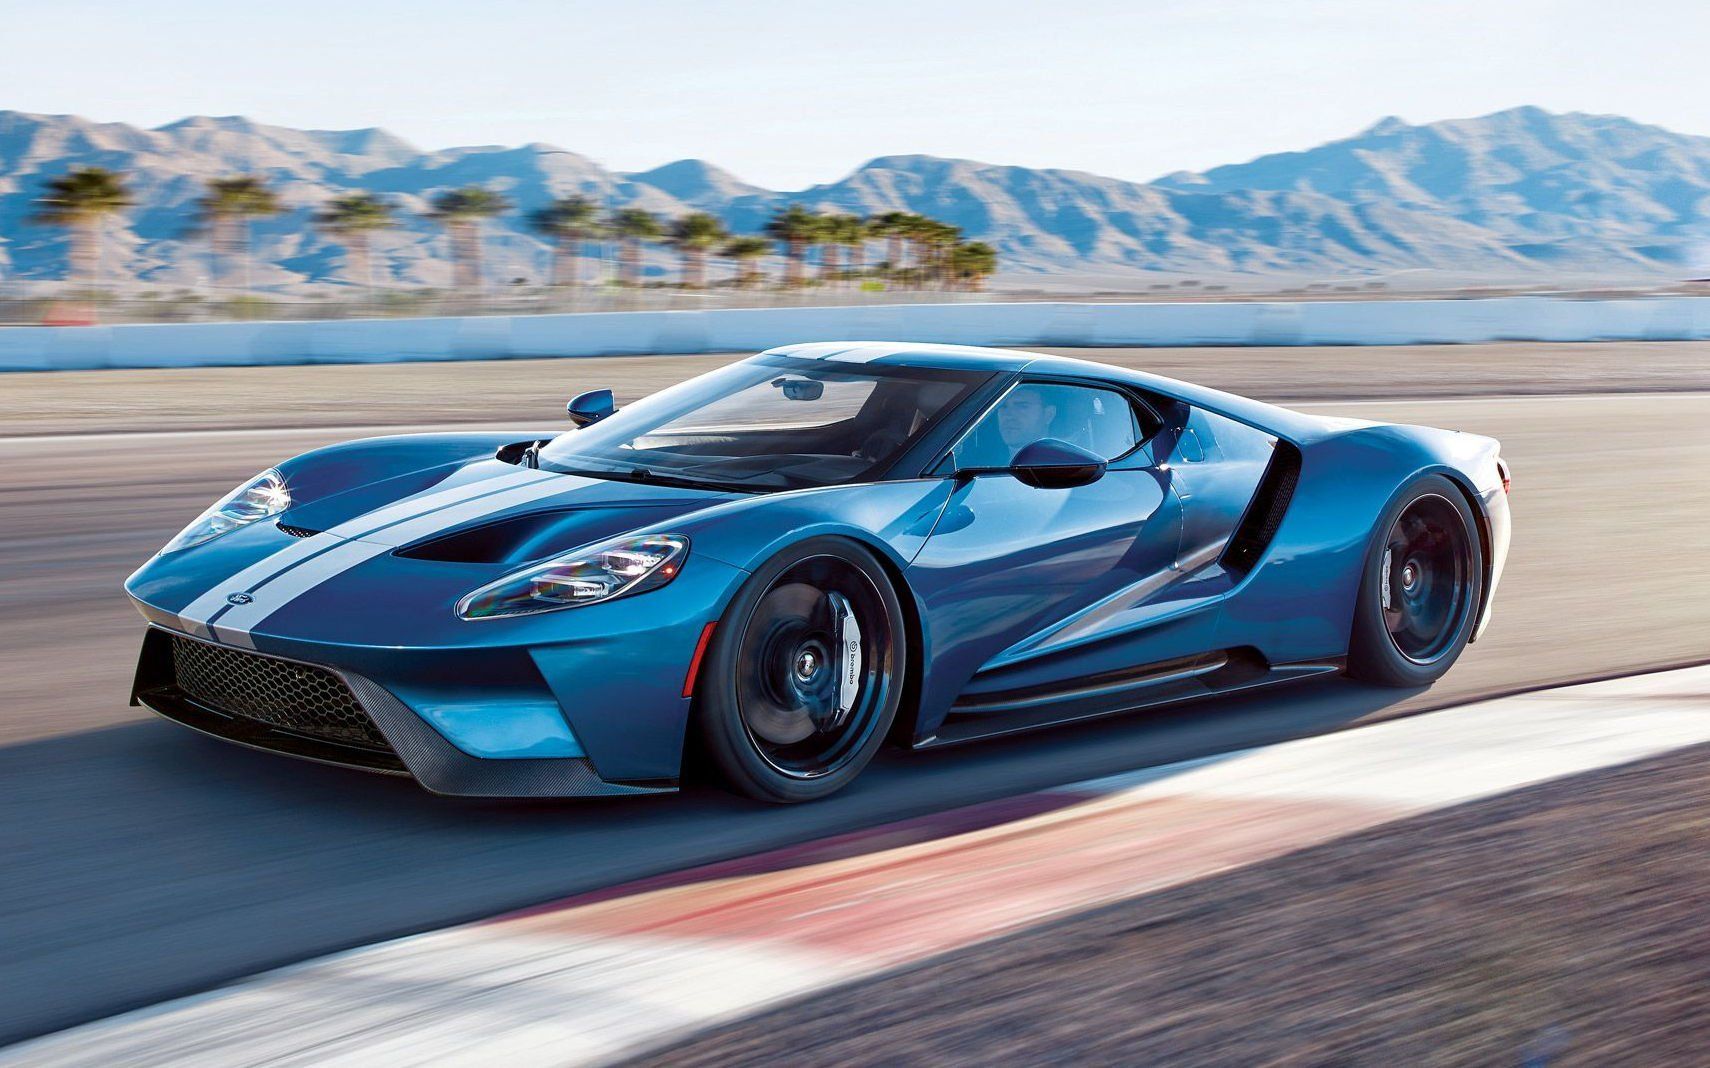 122019-ford-gt-heritage-edition.jpg